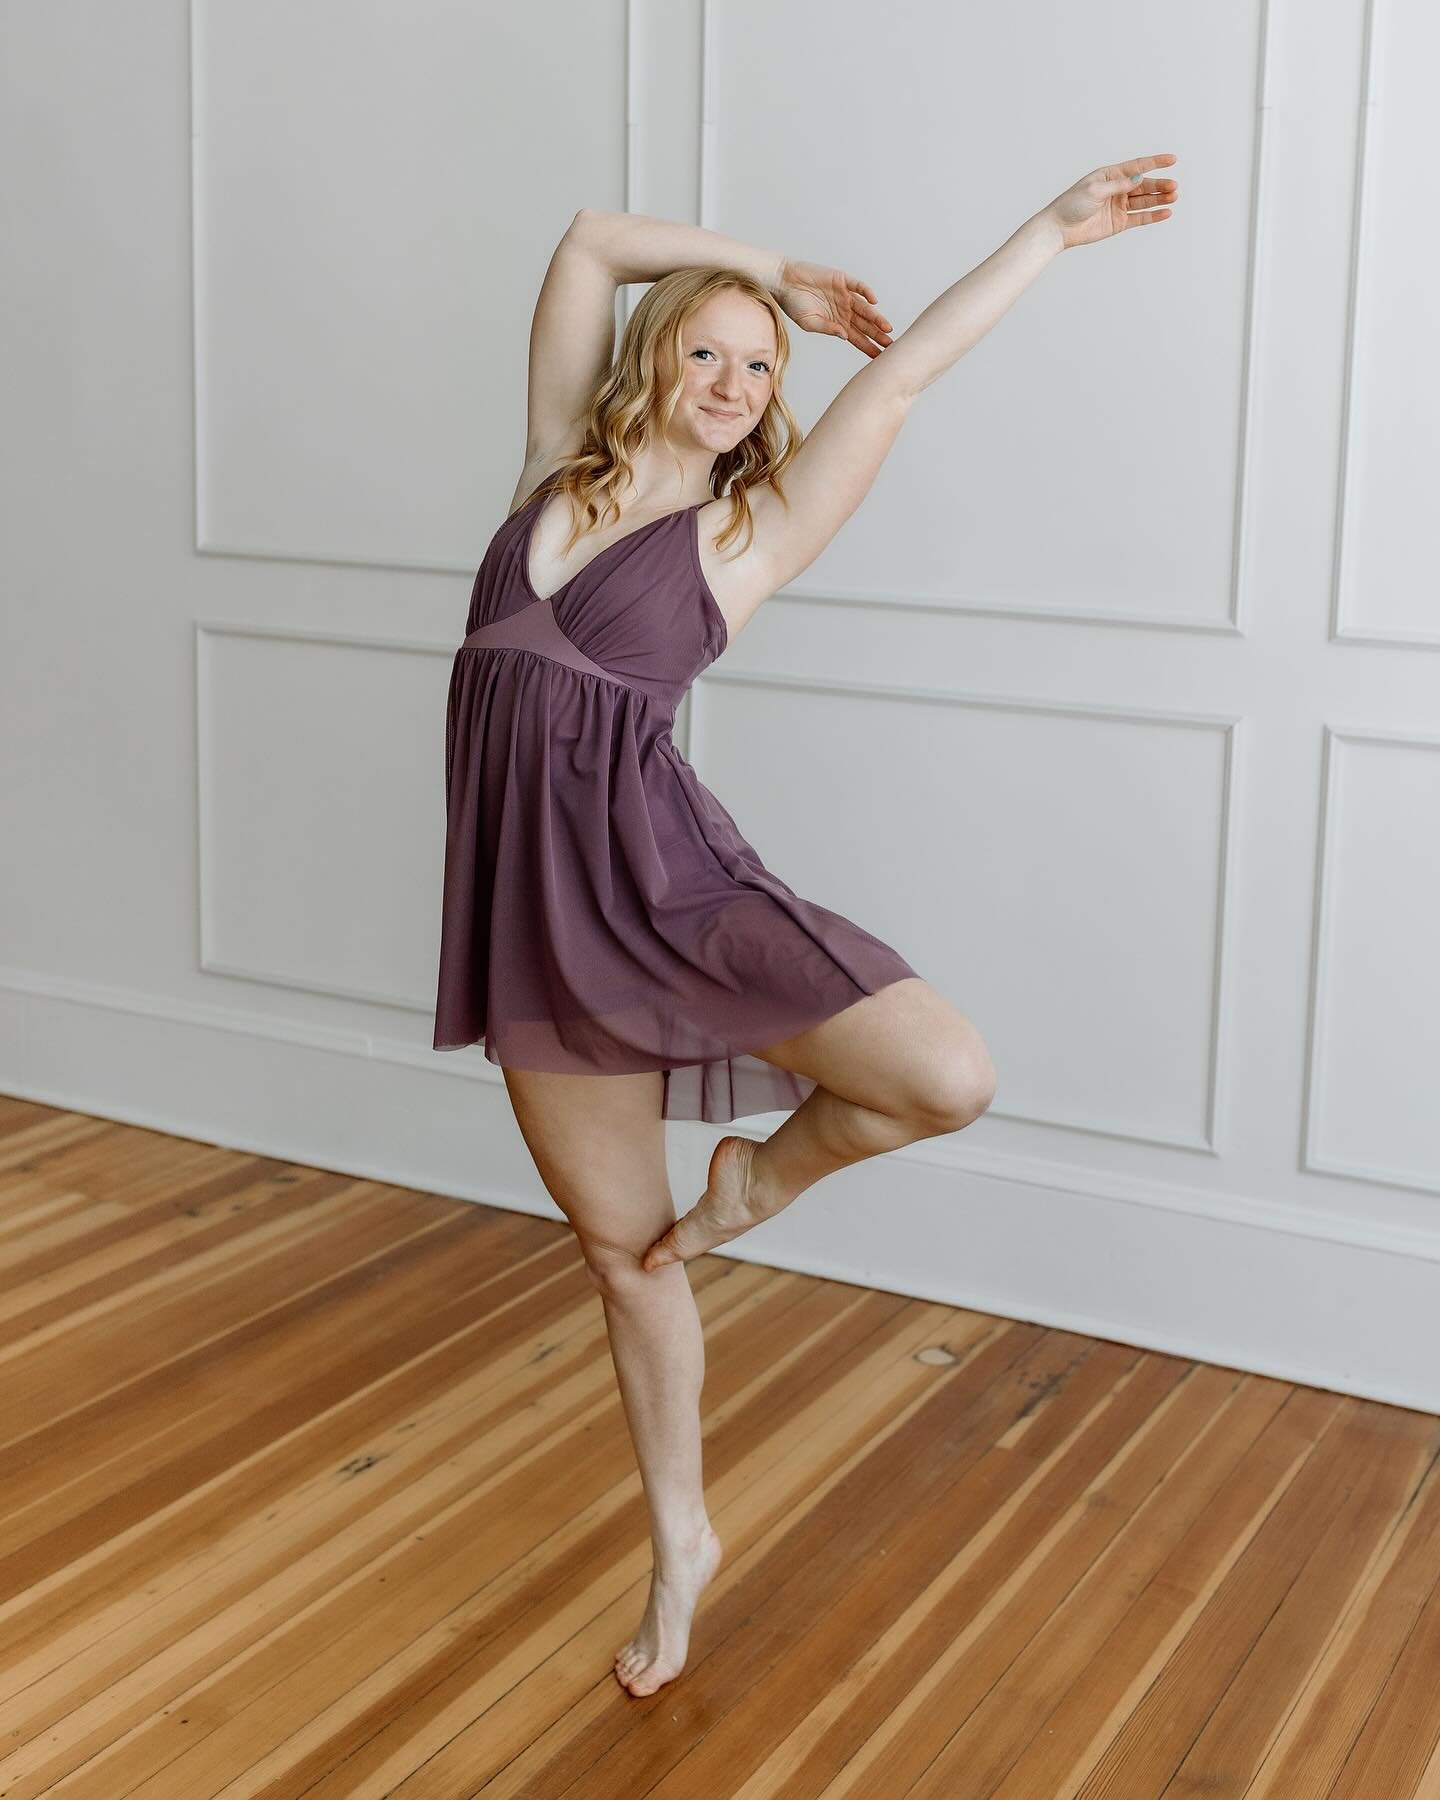 ✨ Senior Spotlight - Ellie ✨
 What is your favorite BritZa memory?
The advanced sleepovers at the studio

When did you start dancing at BritZa?
When I was 3 years old 

What is your favorite dance that you have performed?
Either Advanced Jazz &ldquo;